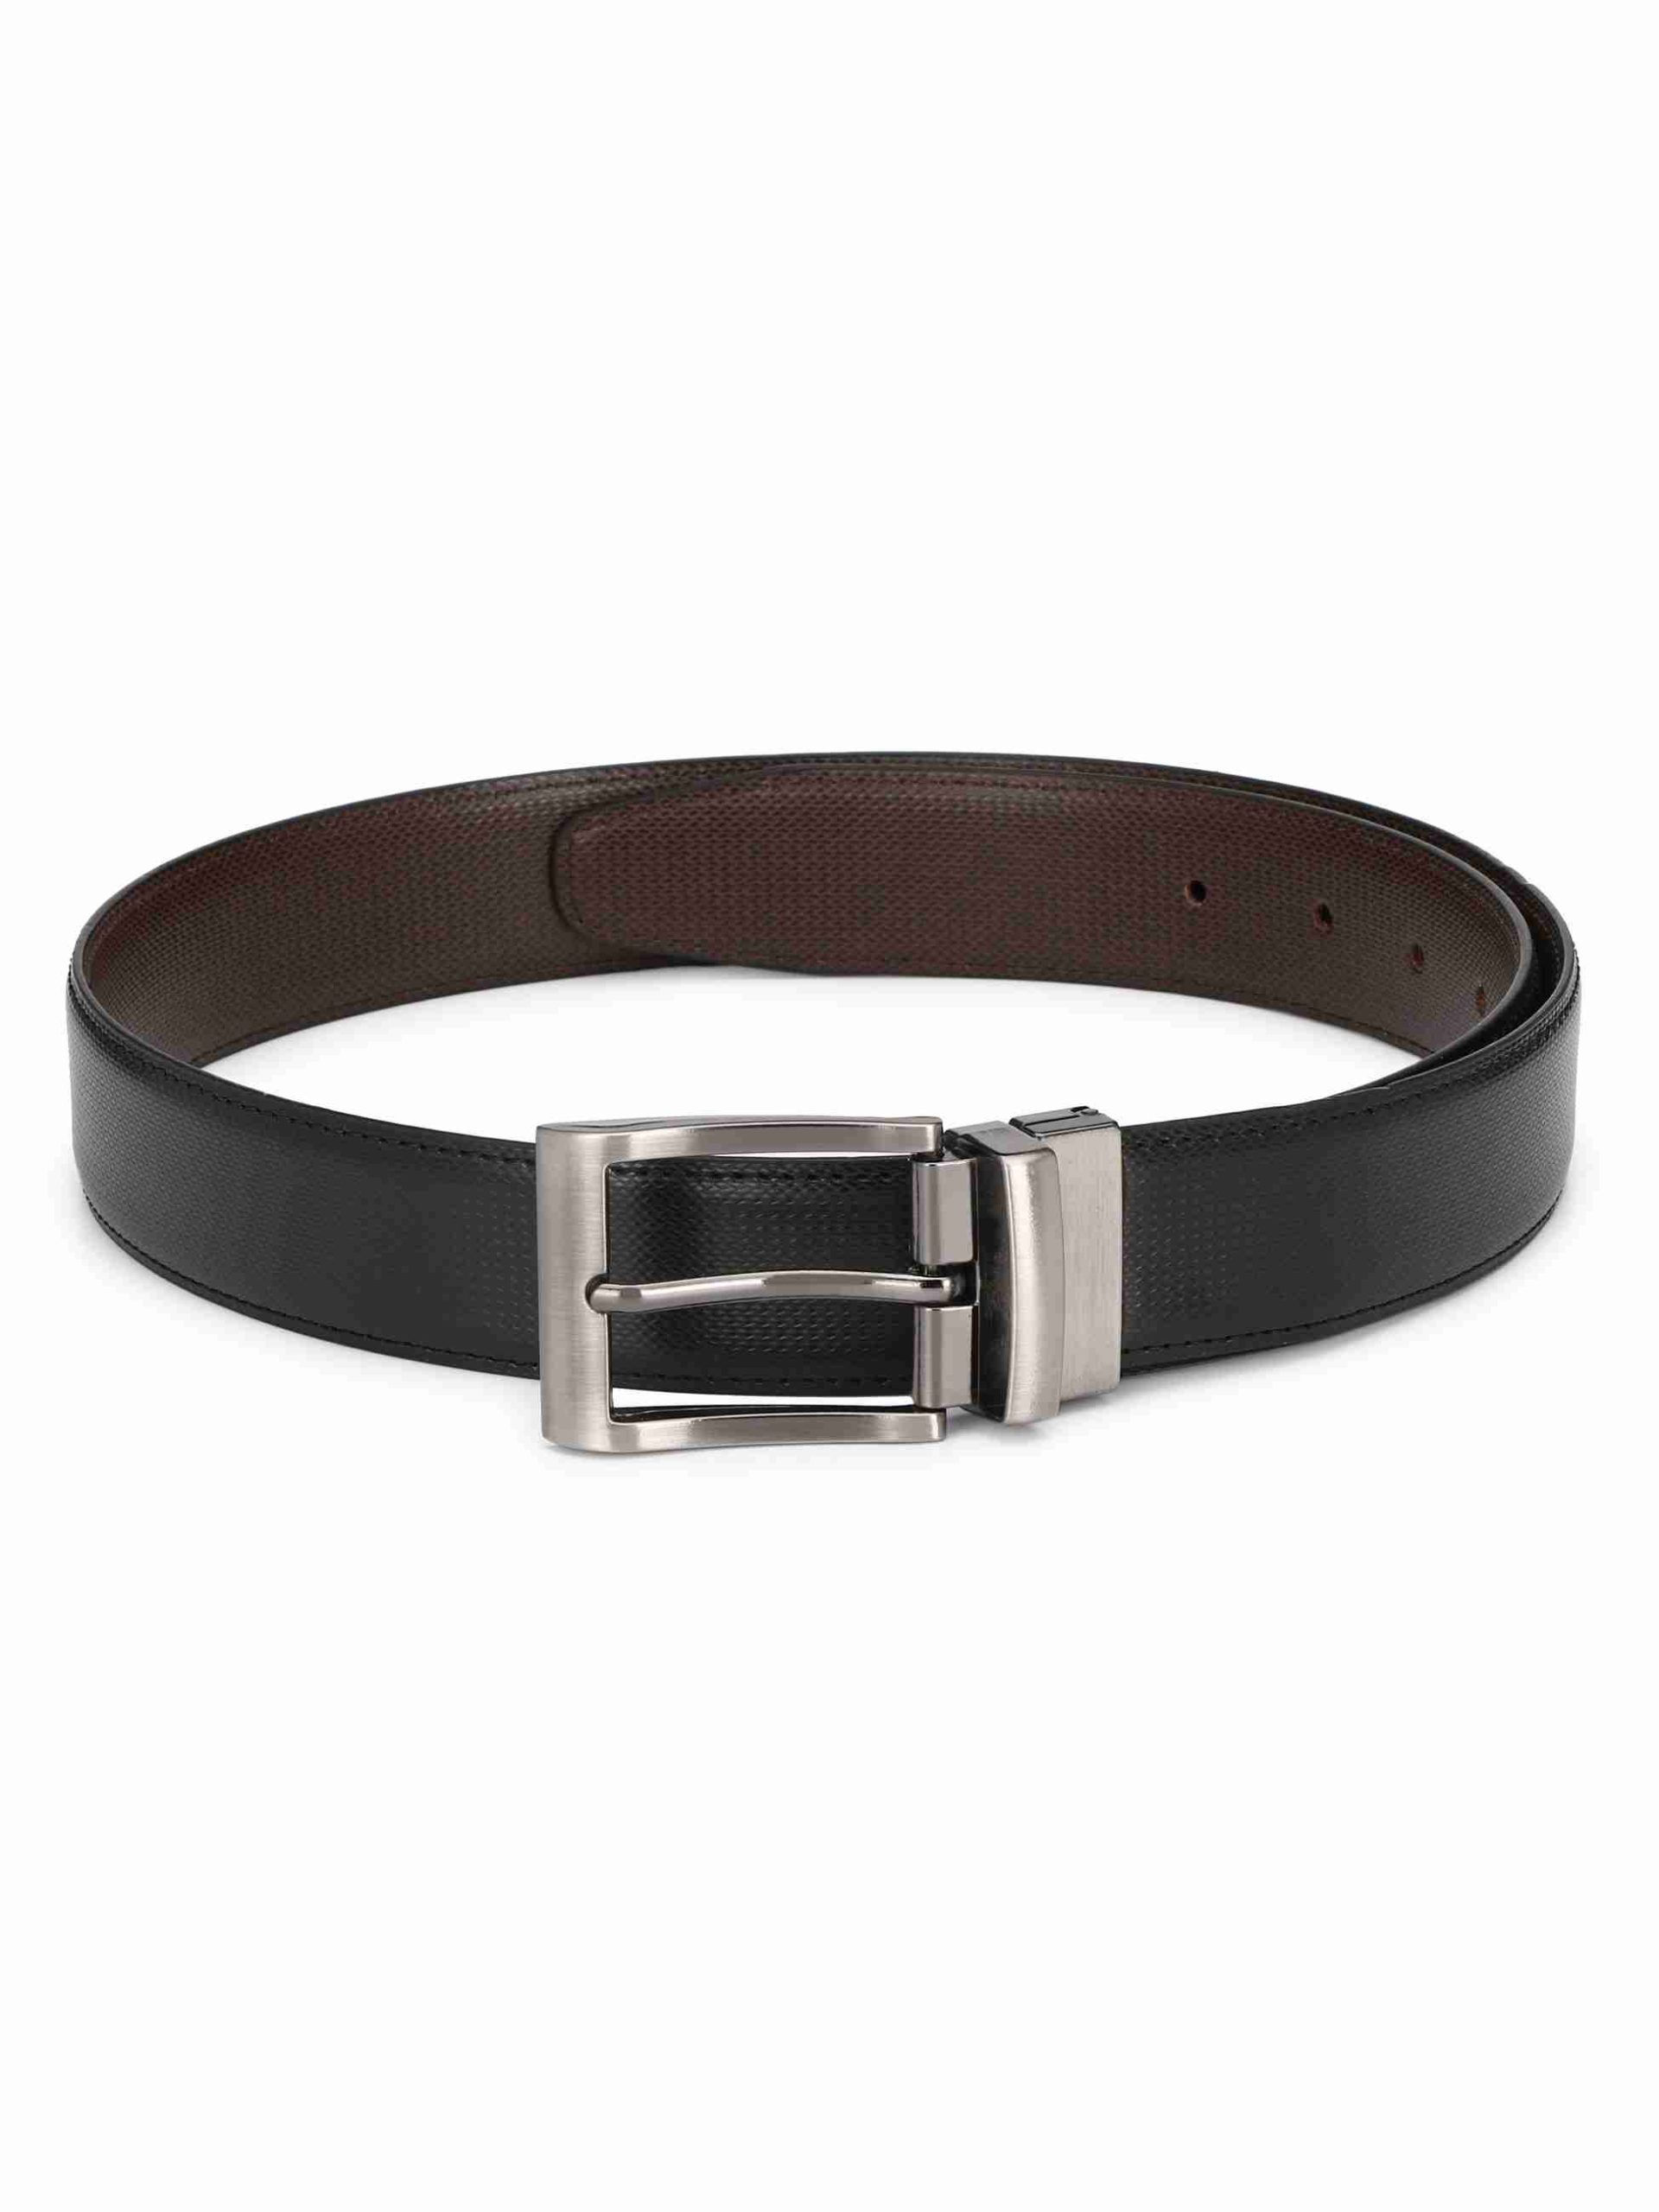 DOTTED DESIGN PU REVERSIBLE BELT WITH TURNING BUCKLE - CALVADOSS